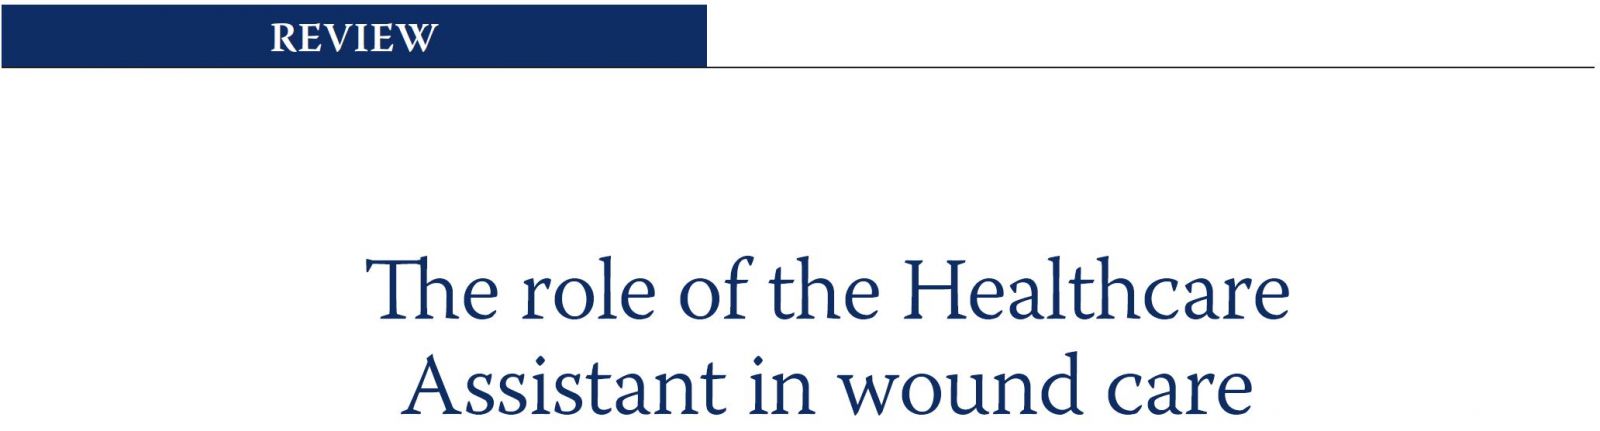 The role of the healthcare assistant in wound care